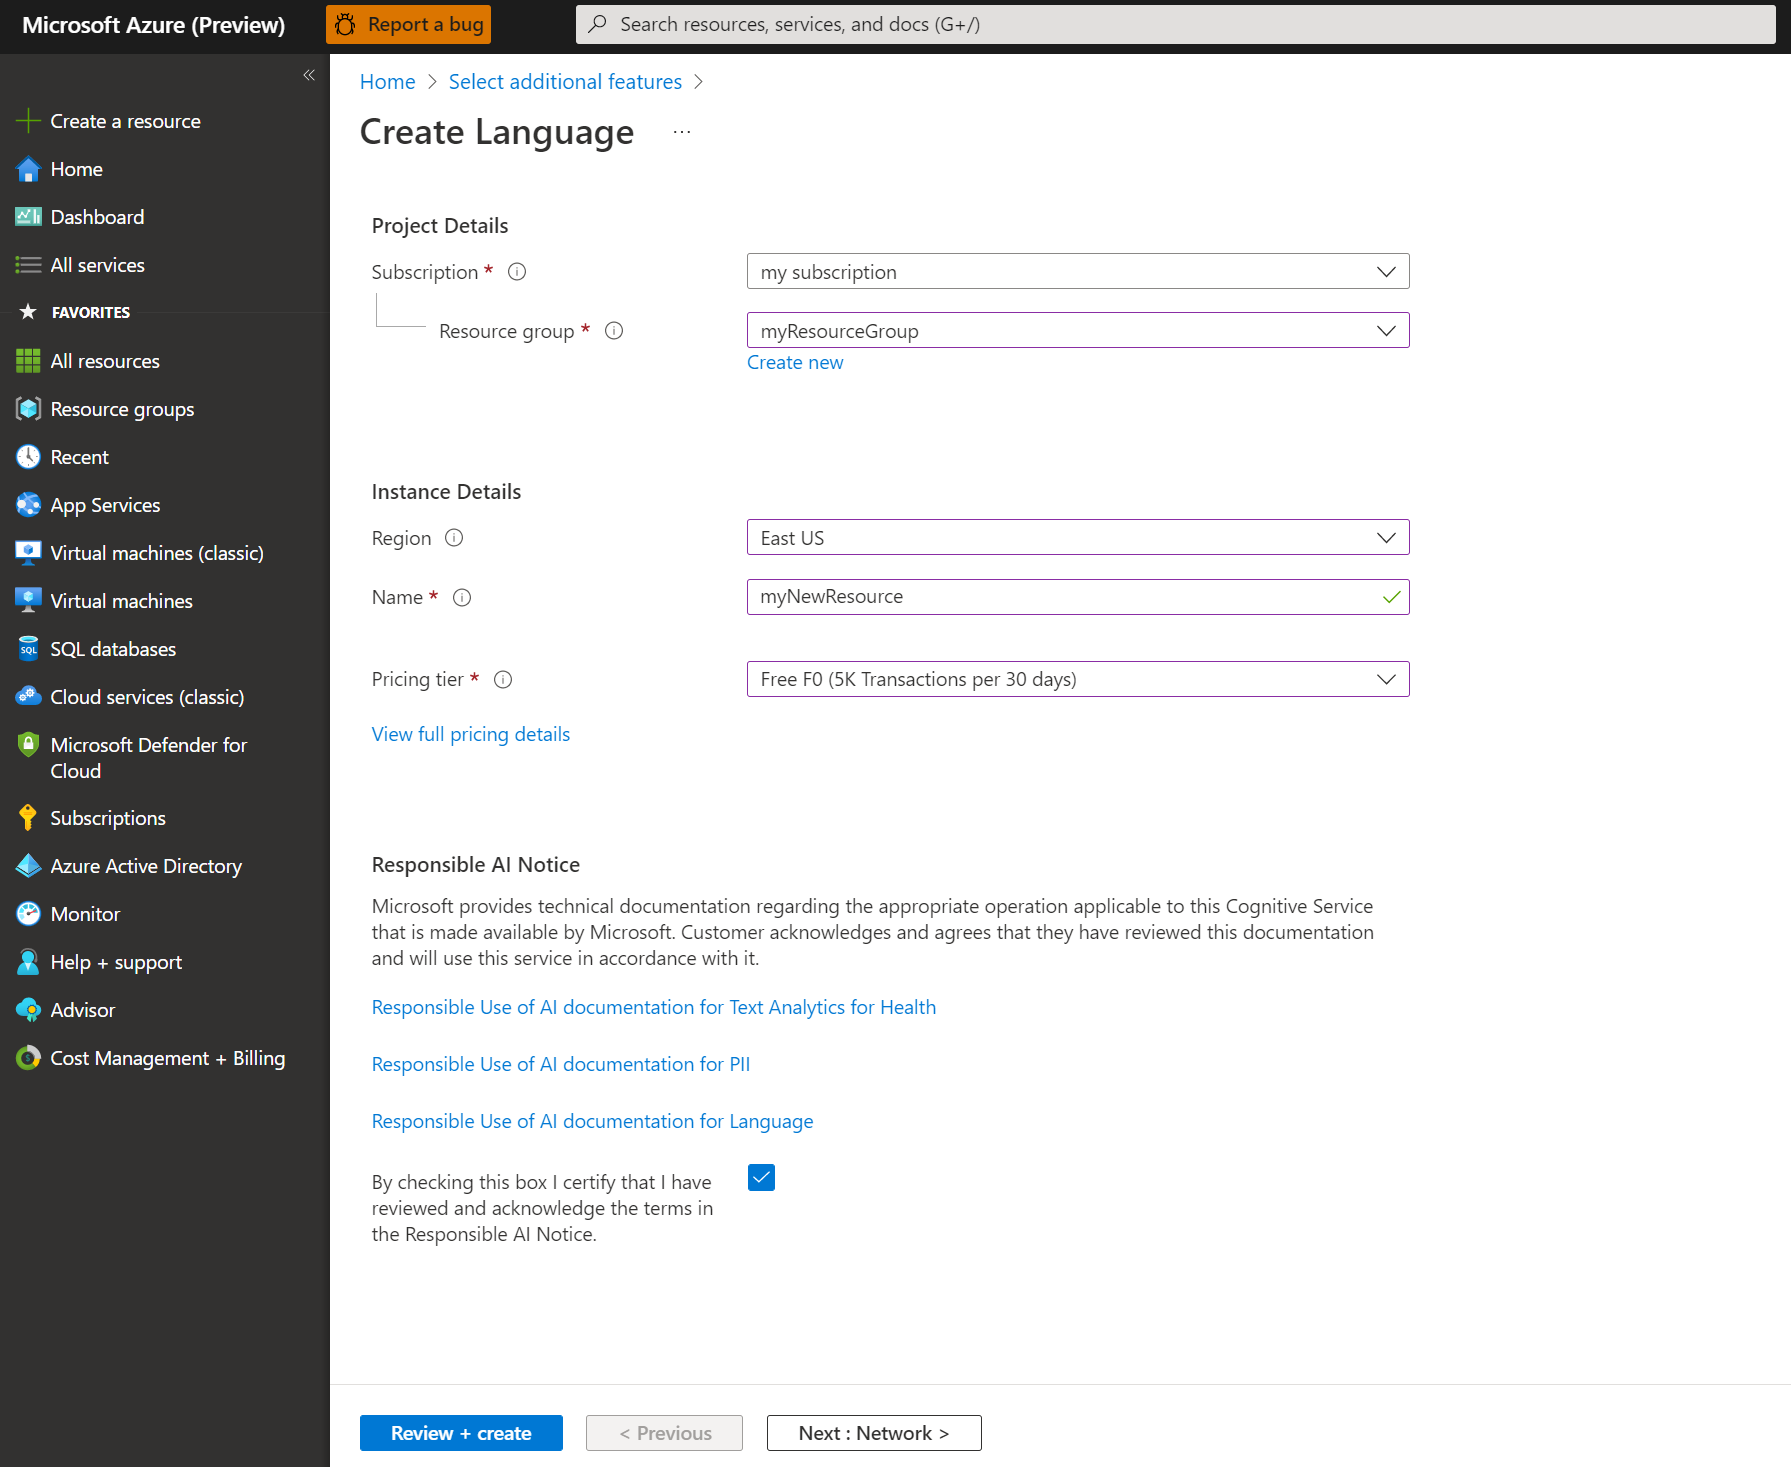 A screenshot showing resource creation details in the Azure portal.